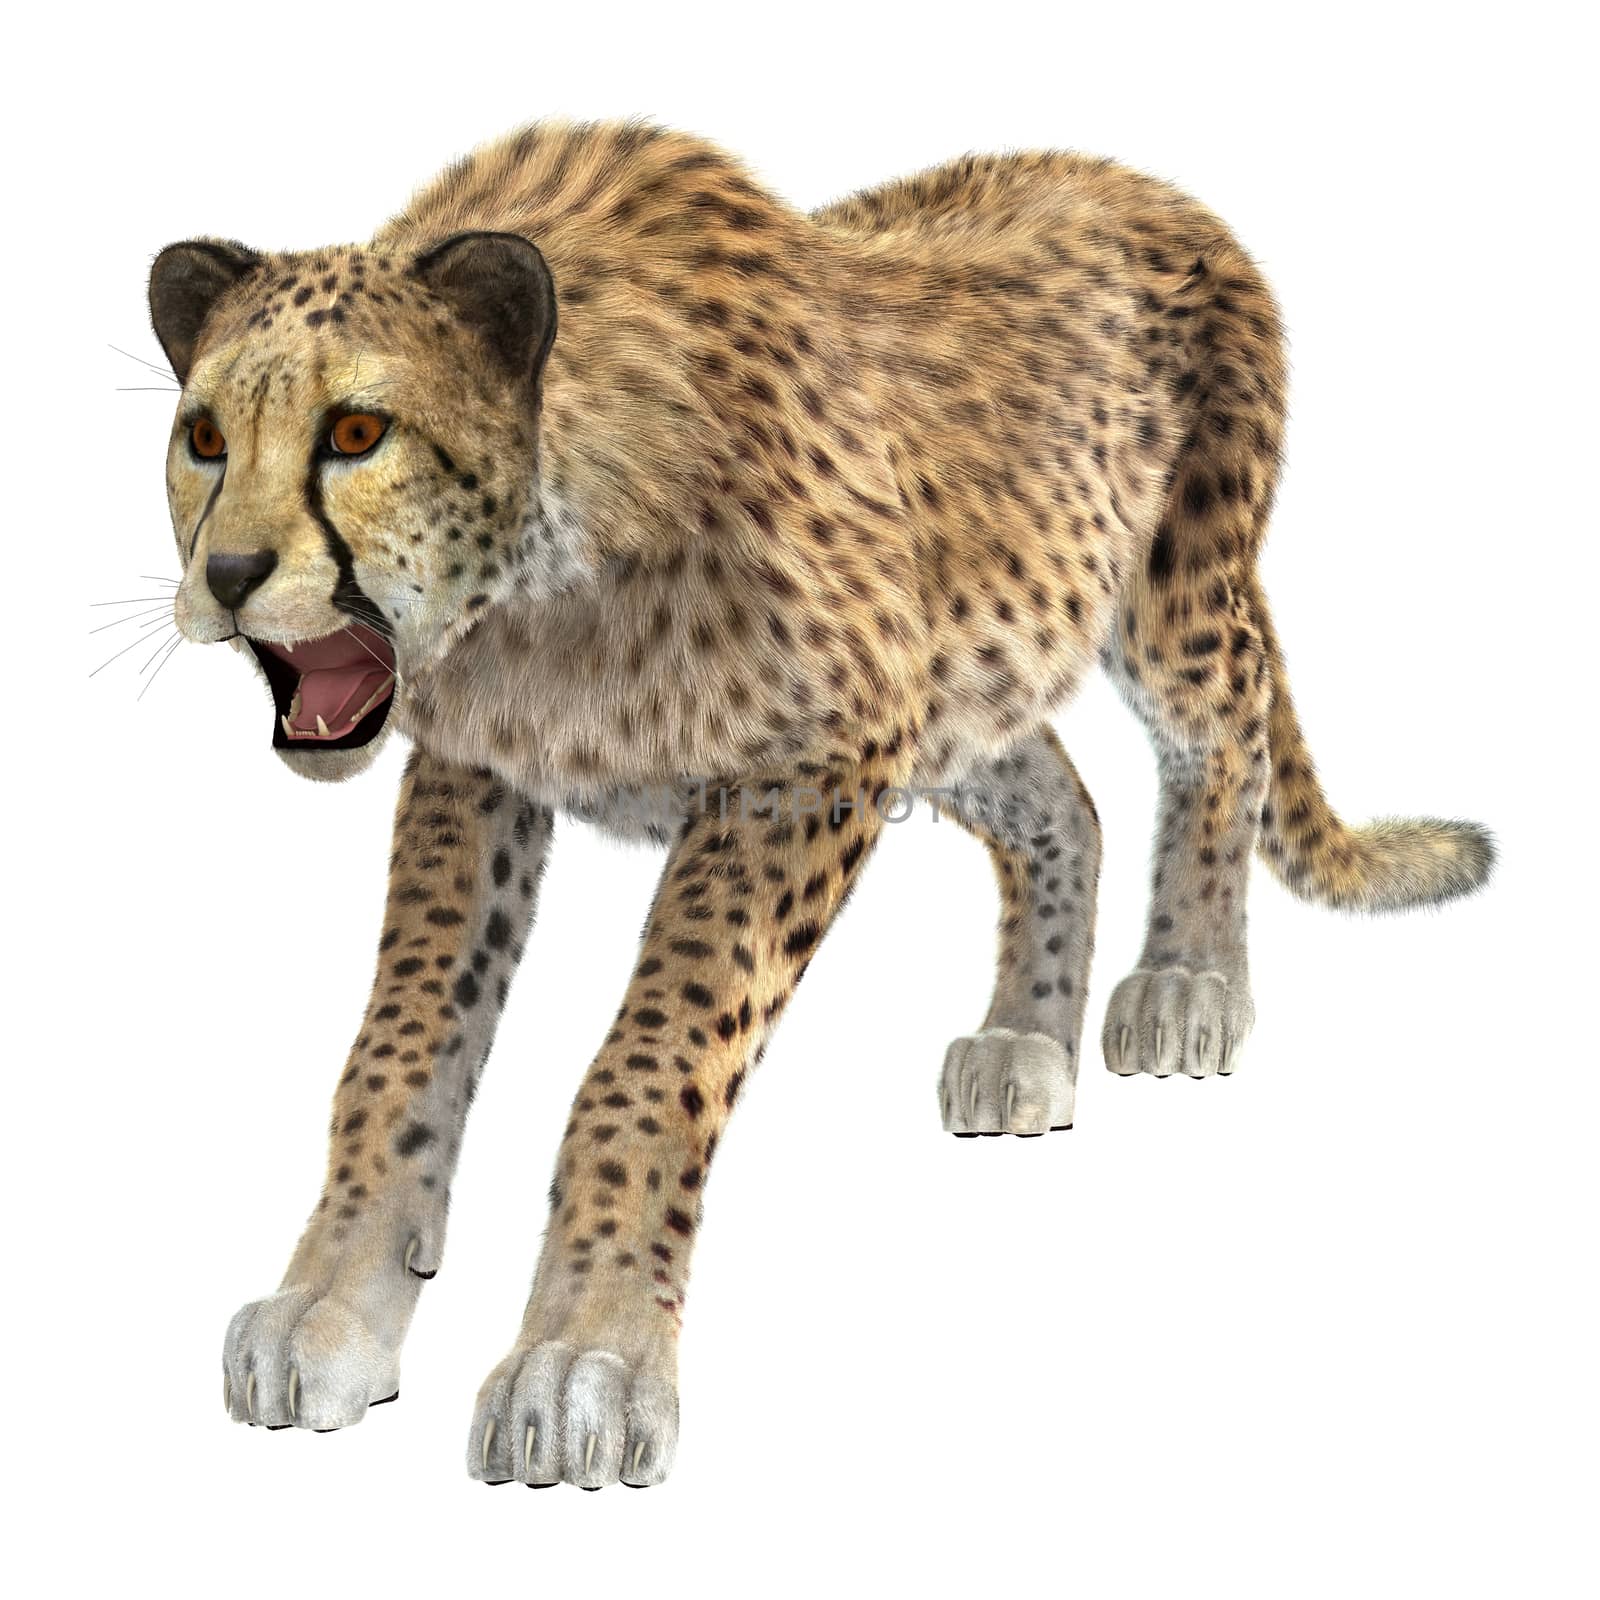 3D digital render of a big cat cheetah isolated on white background